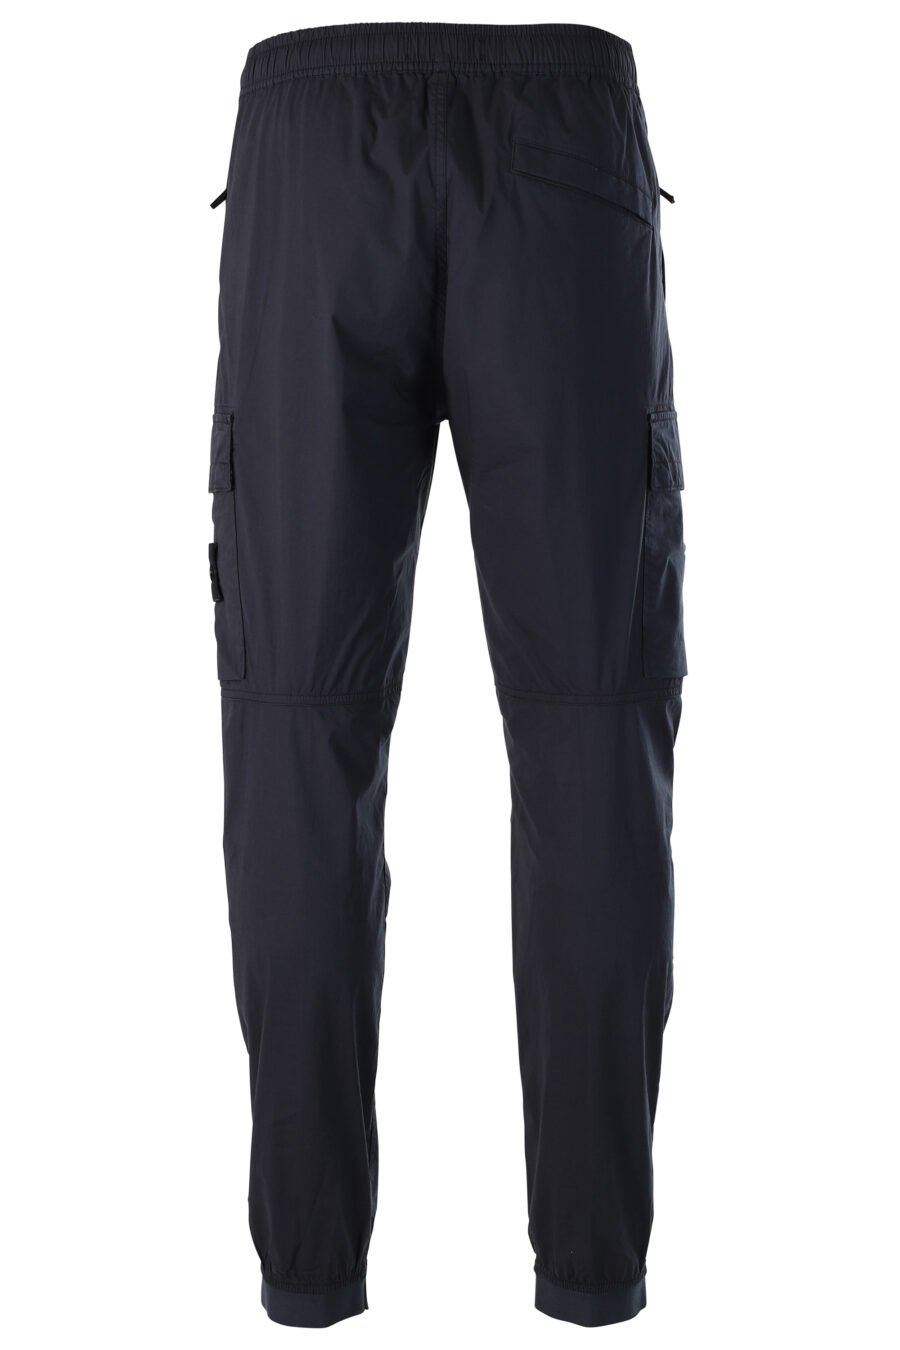 Dark blue cargo style trousers with snap and patch - 8052572510984 3